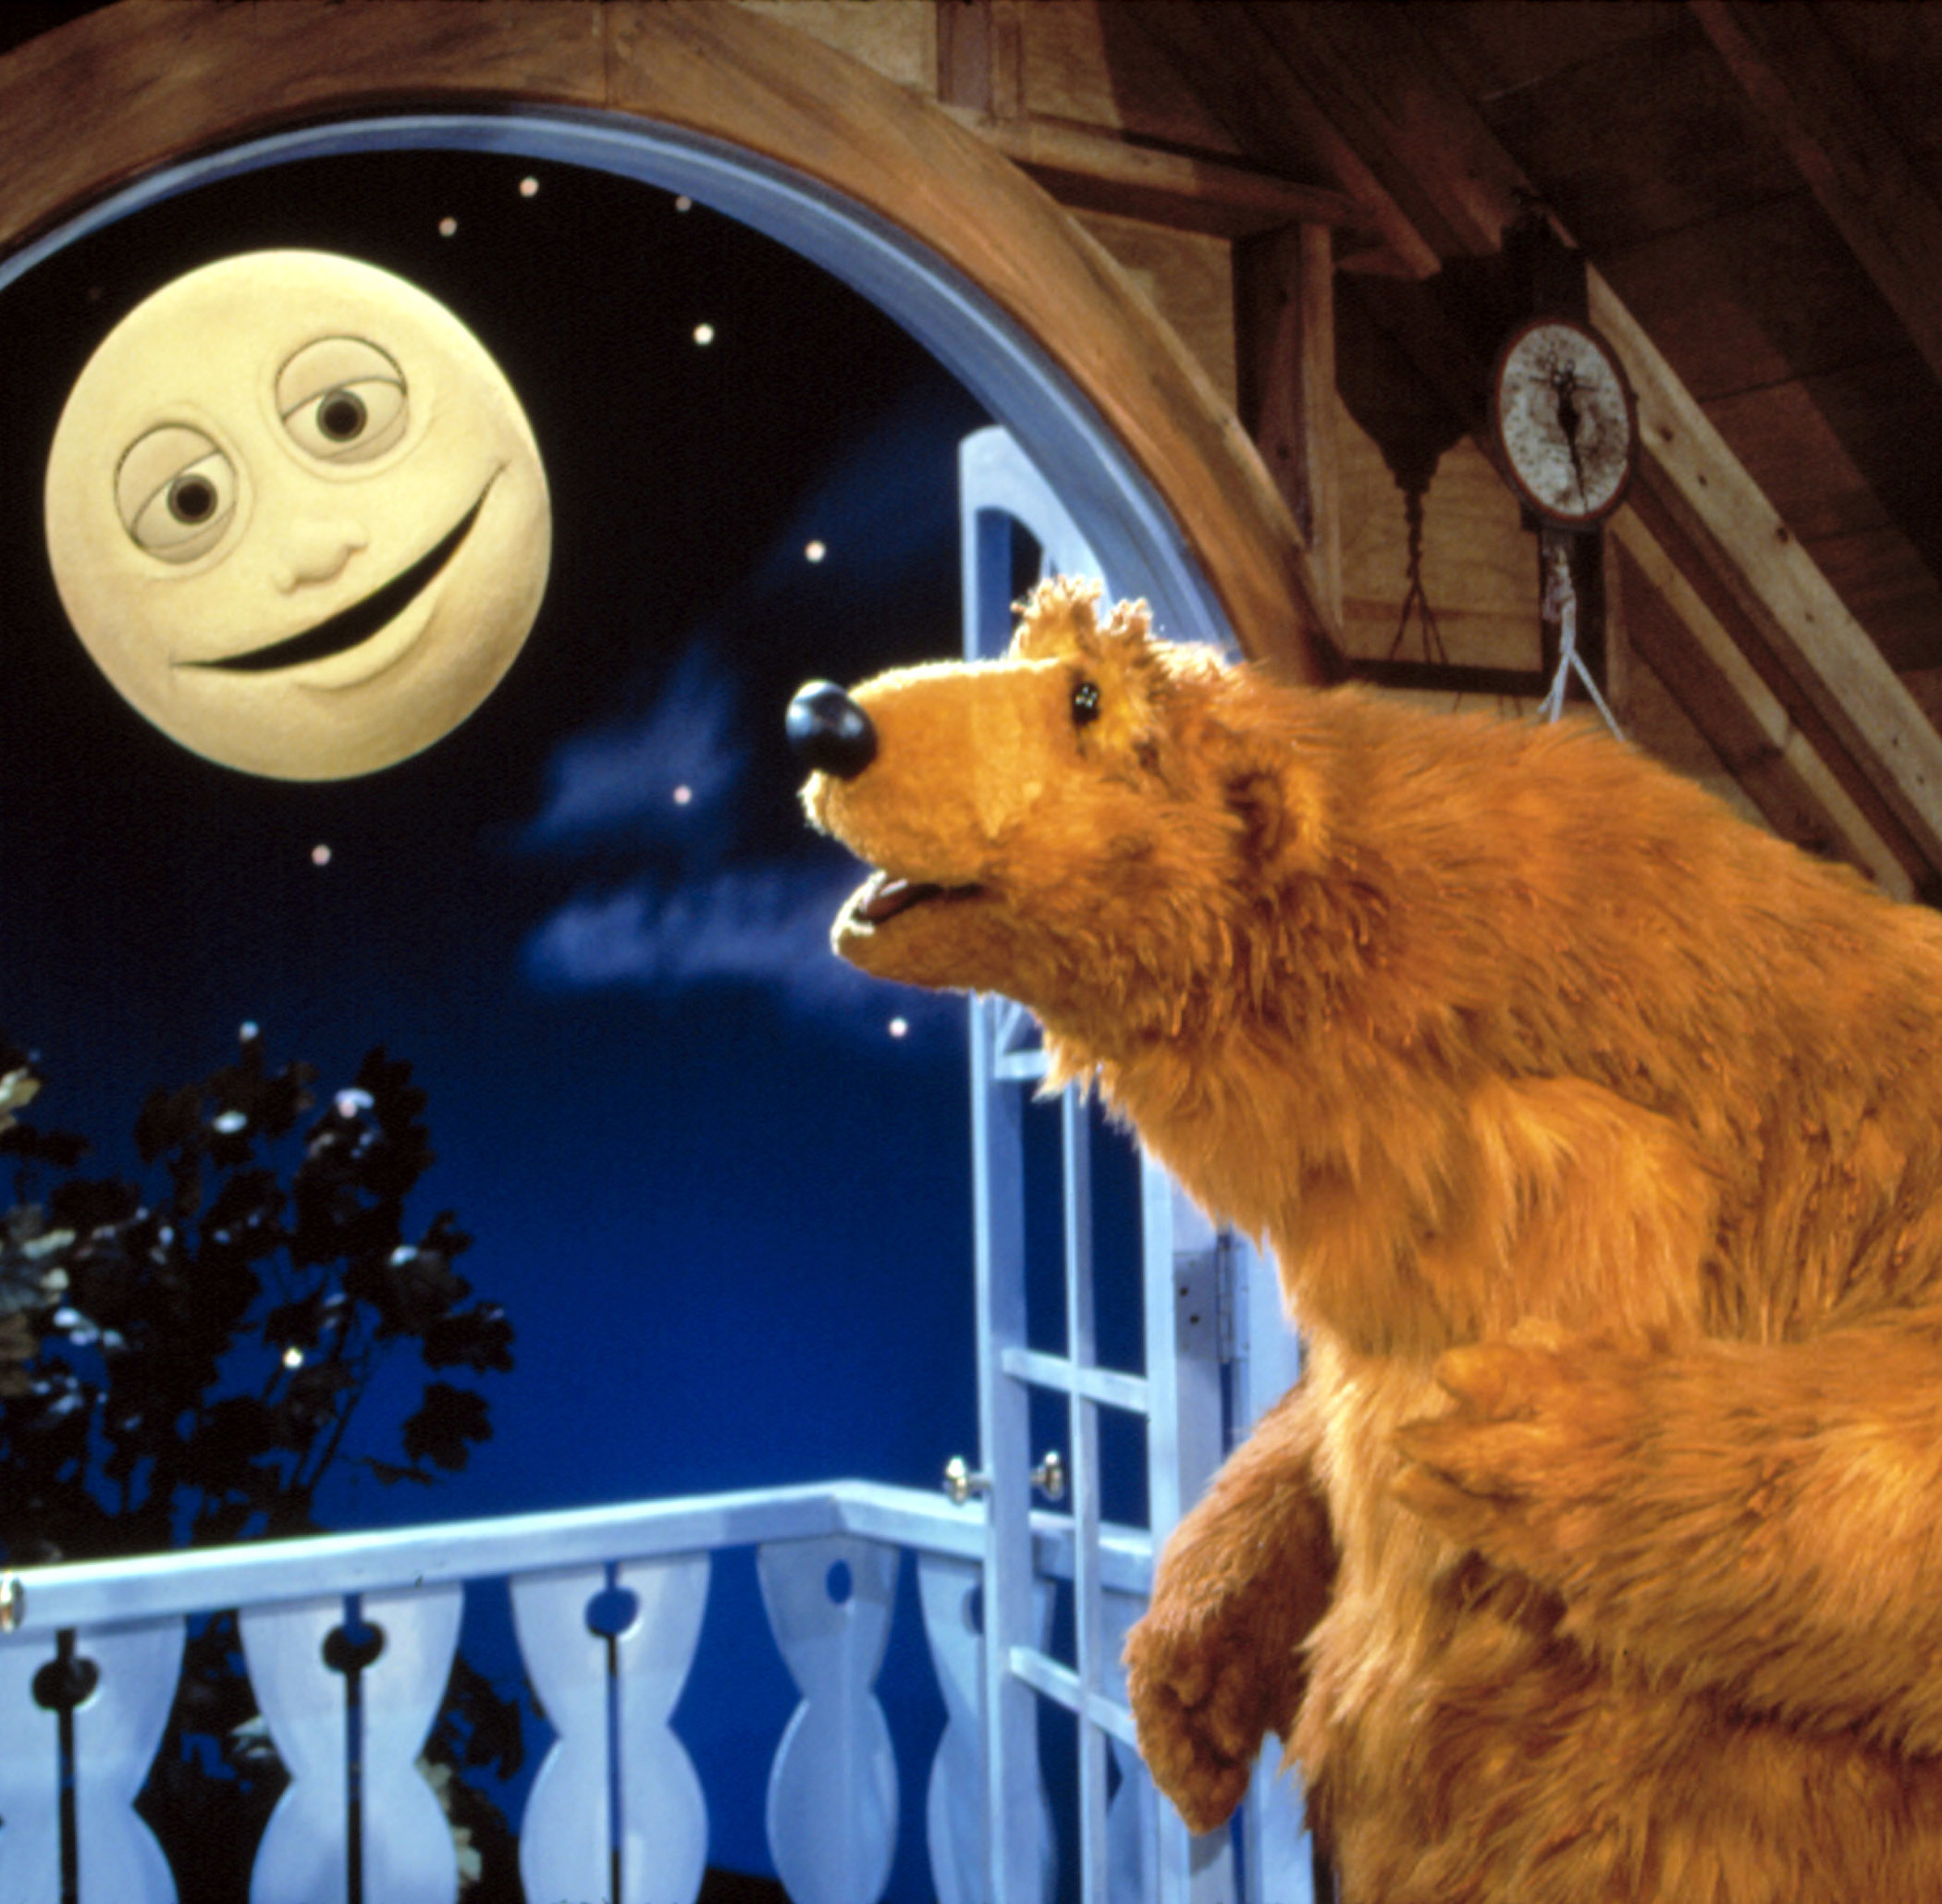 Bear in the Big Blue House character Bear stands by a window with Luna the moon outside